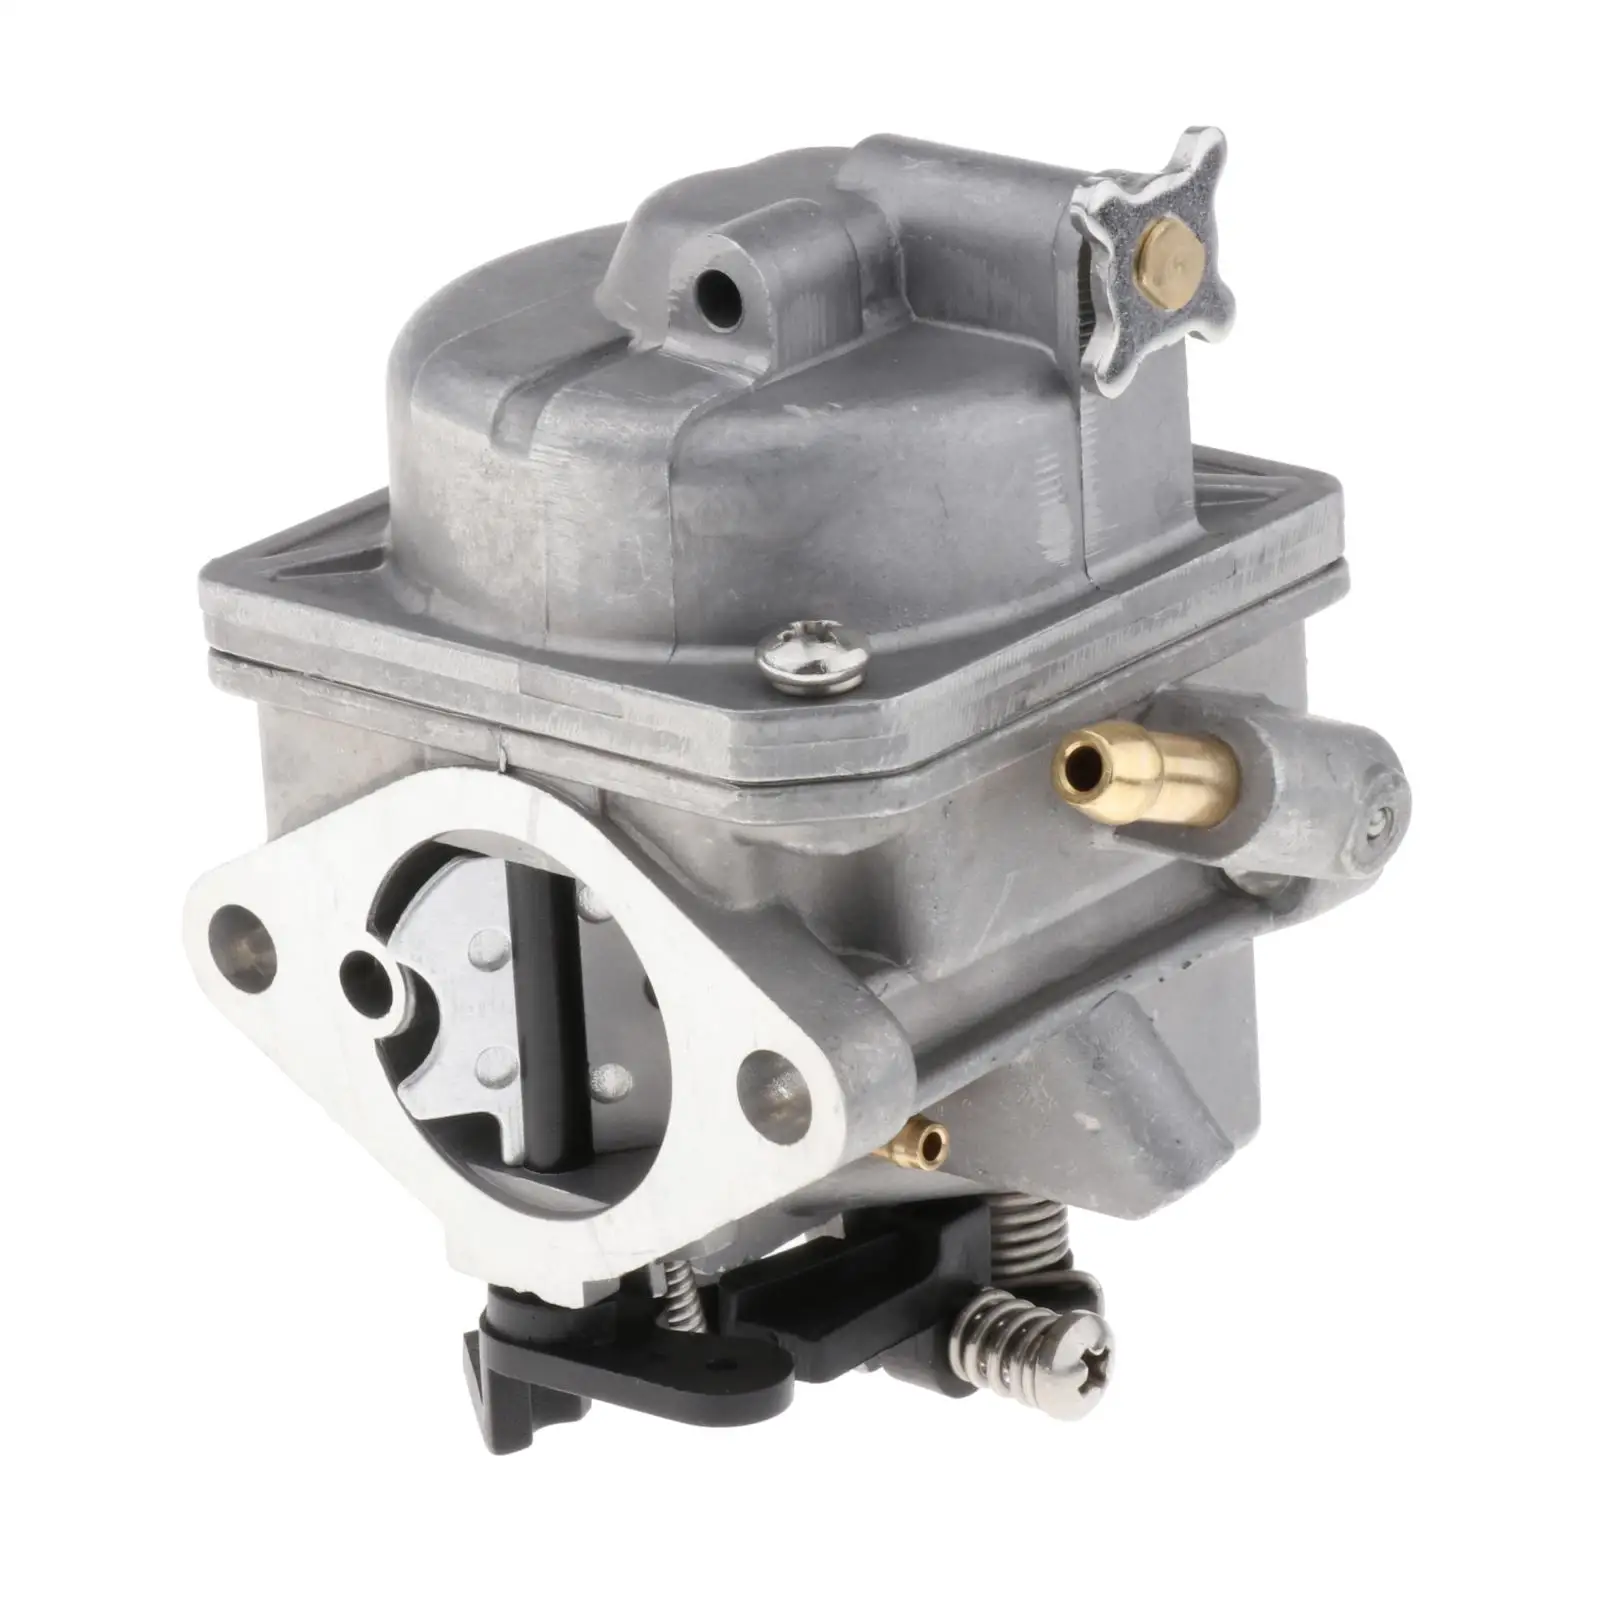 16100-ZV1-A00 16100-ZV1-A03 Carburetor Carb Assy for Honda Outboard BC05B BF 5 HP 4 Stroke